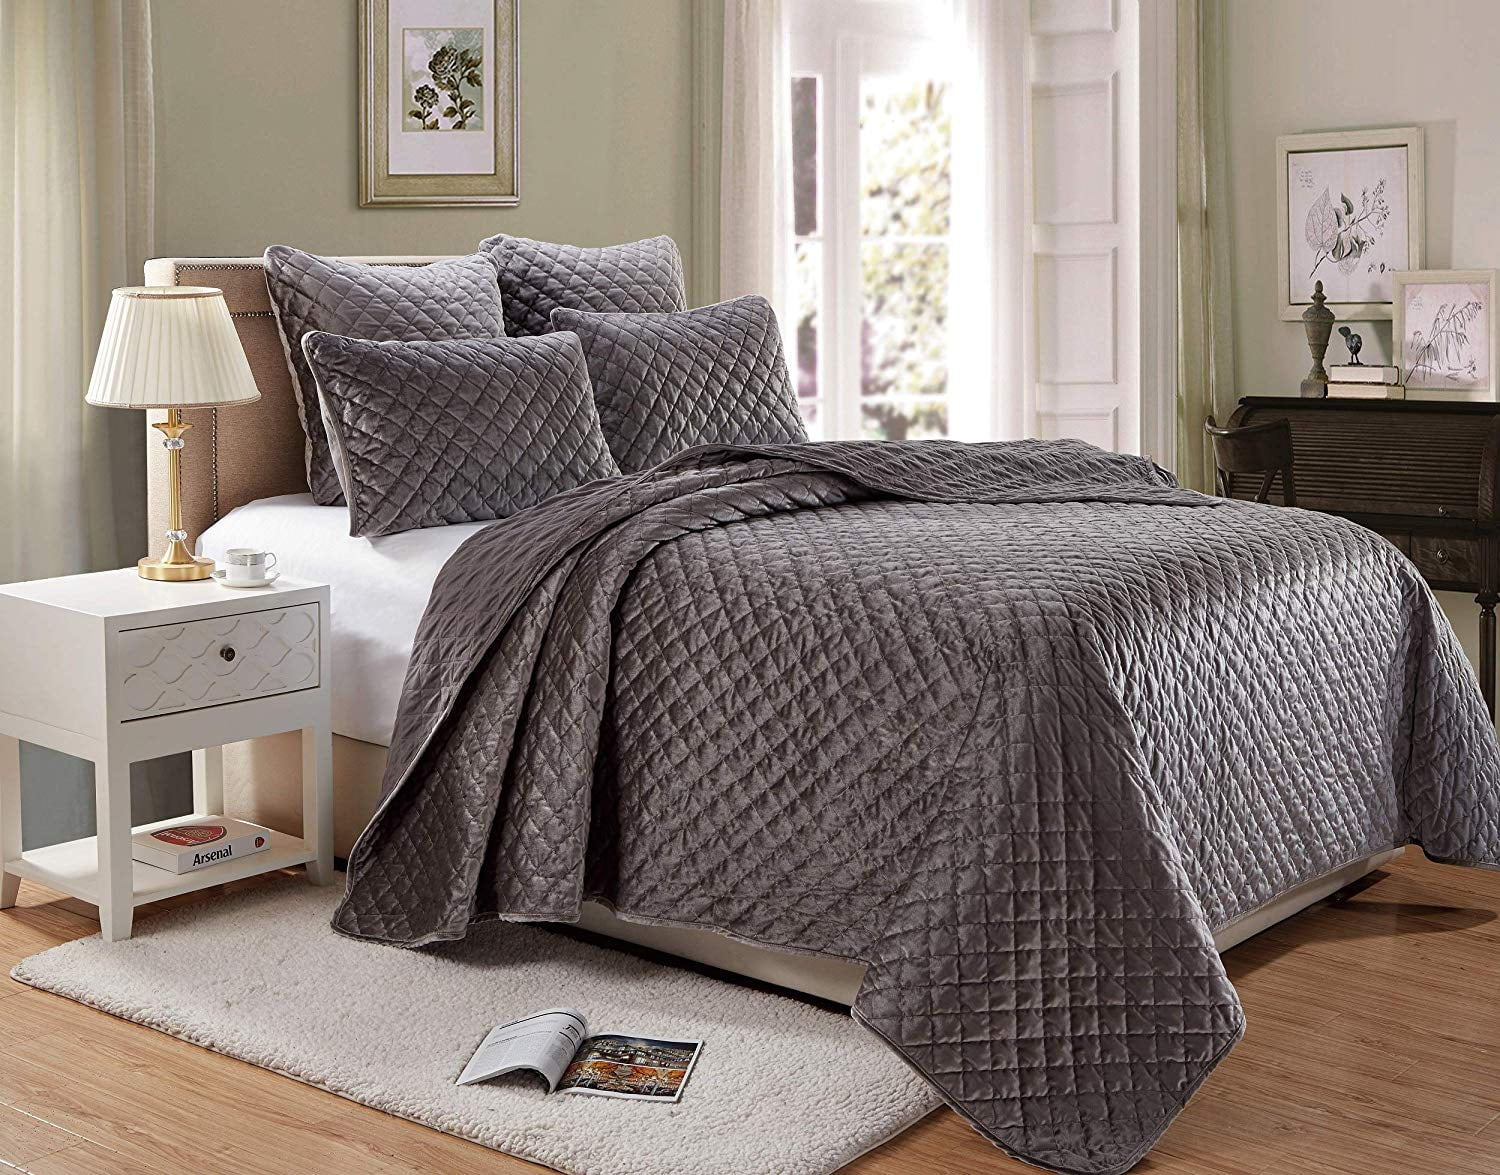 Luxury Nina 3 Piece Quilted Bedspread Dark Grey Double Bed Throw & Pillow Shams 